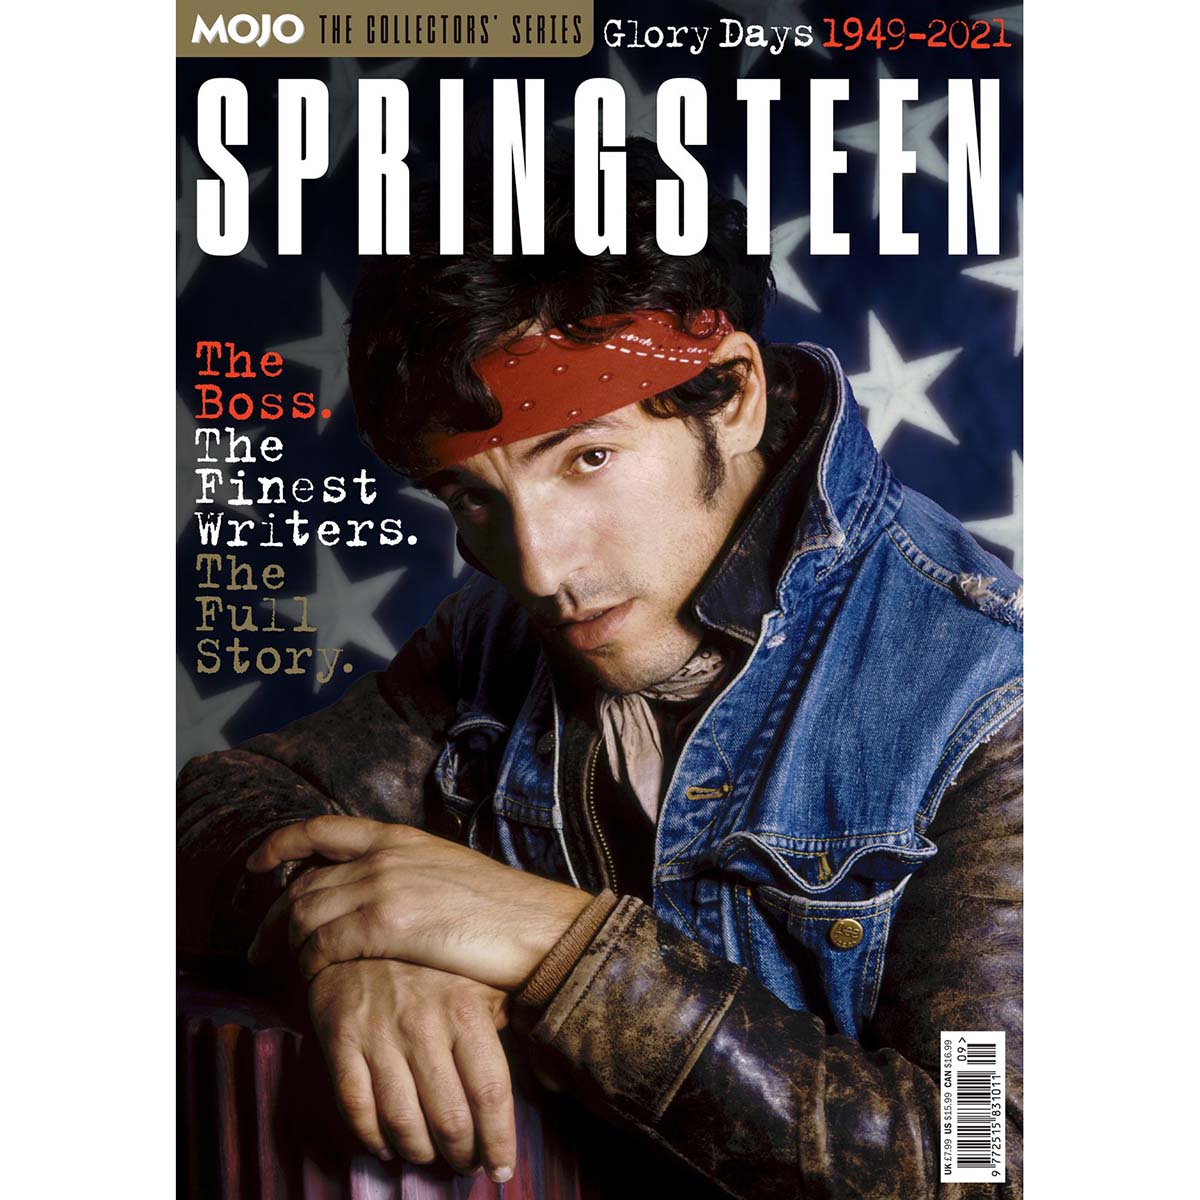 Mojo: The Collectors' Series: Springsteen - Glory Days (1949-2021)